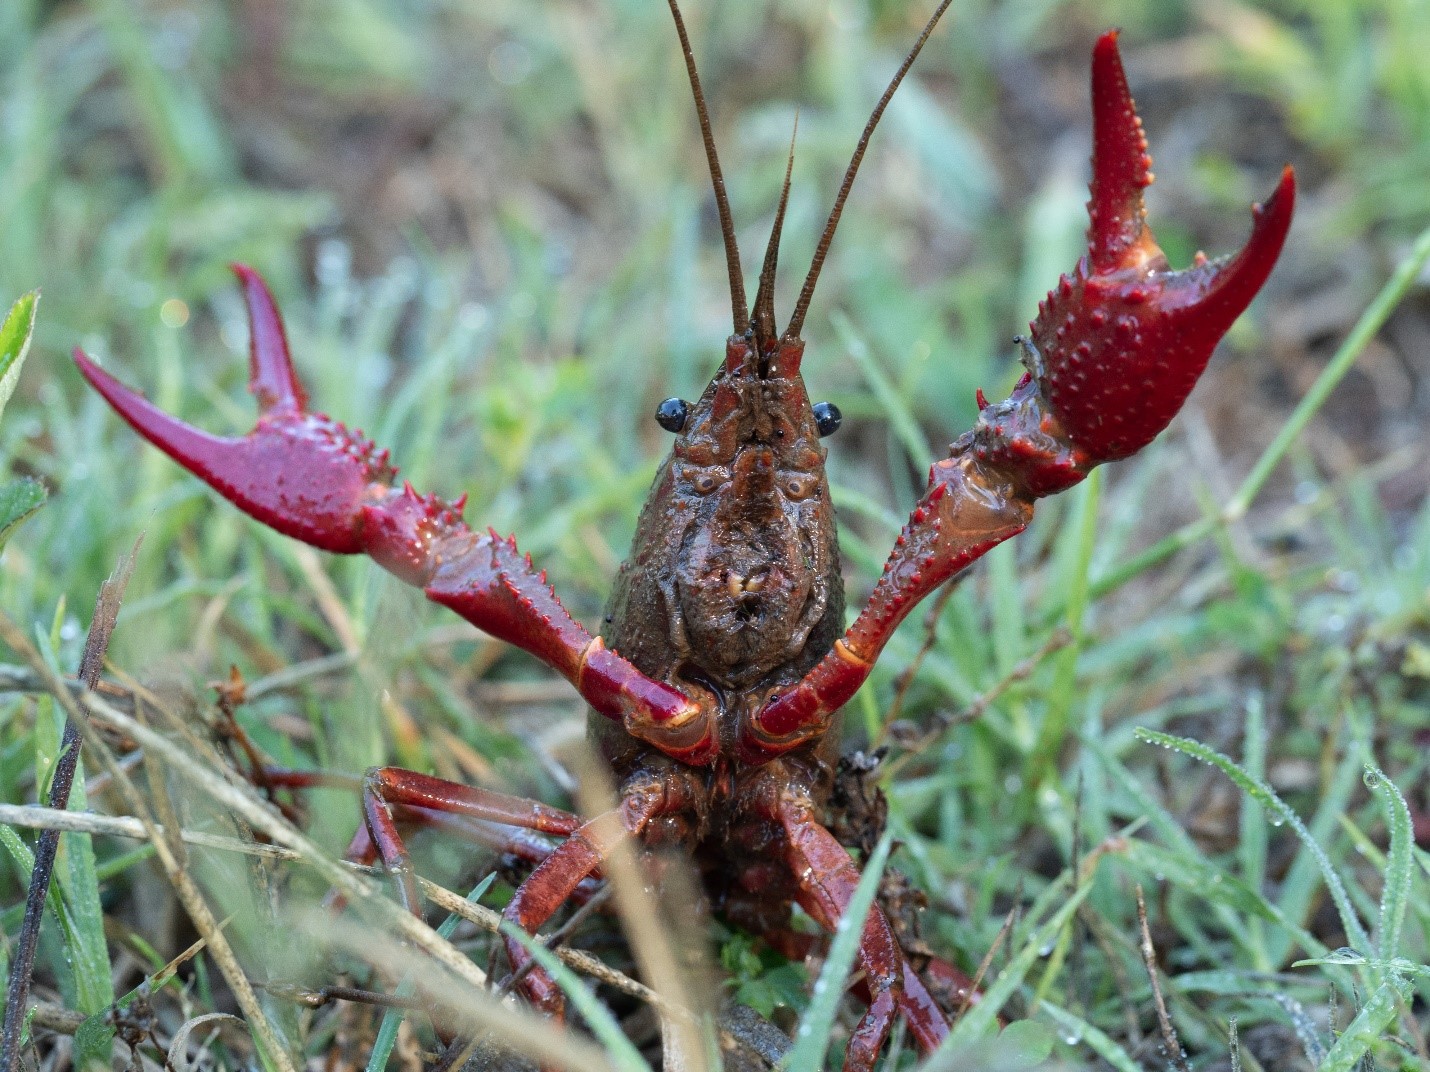 Close-up view of a crawfish holding its front claws up while standing in grass.